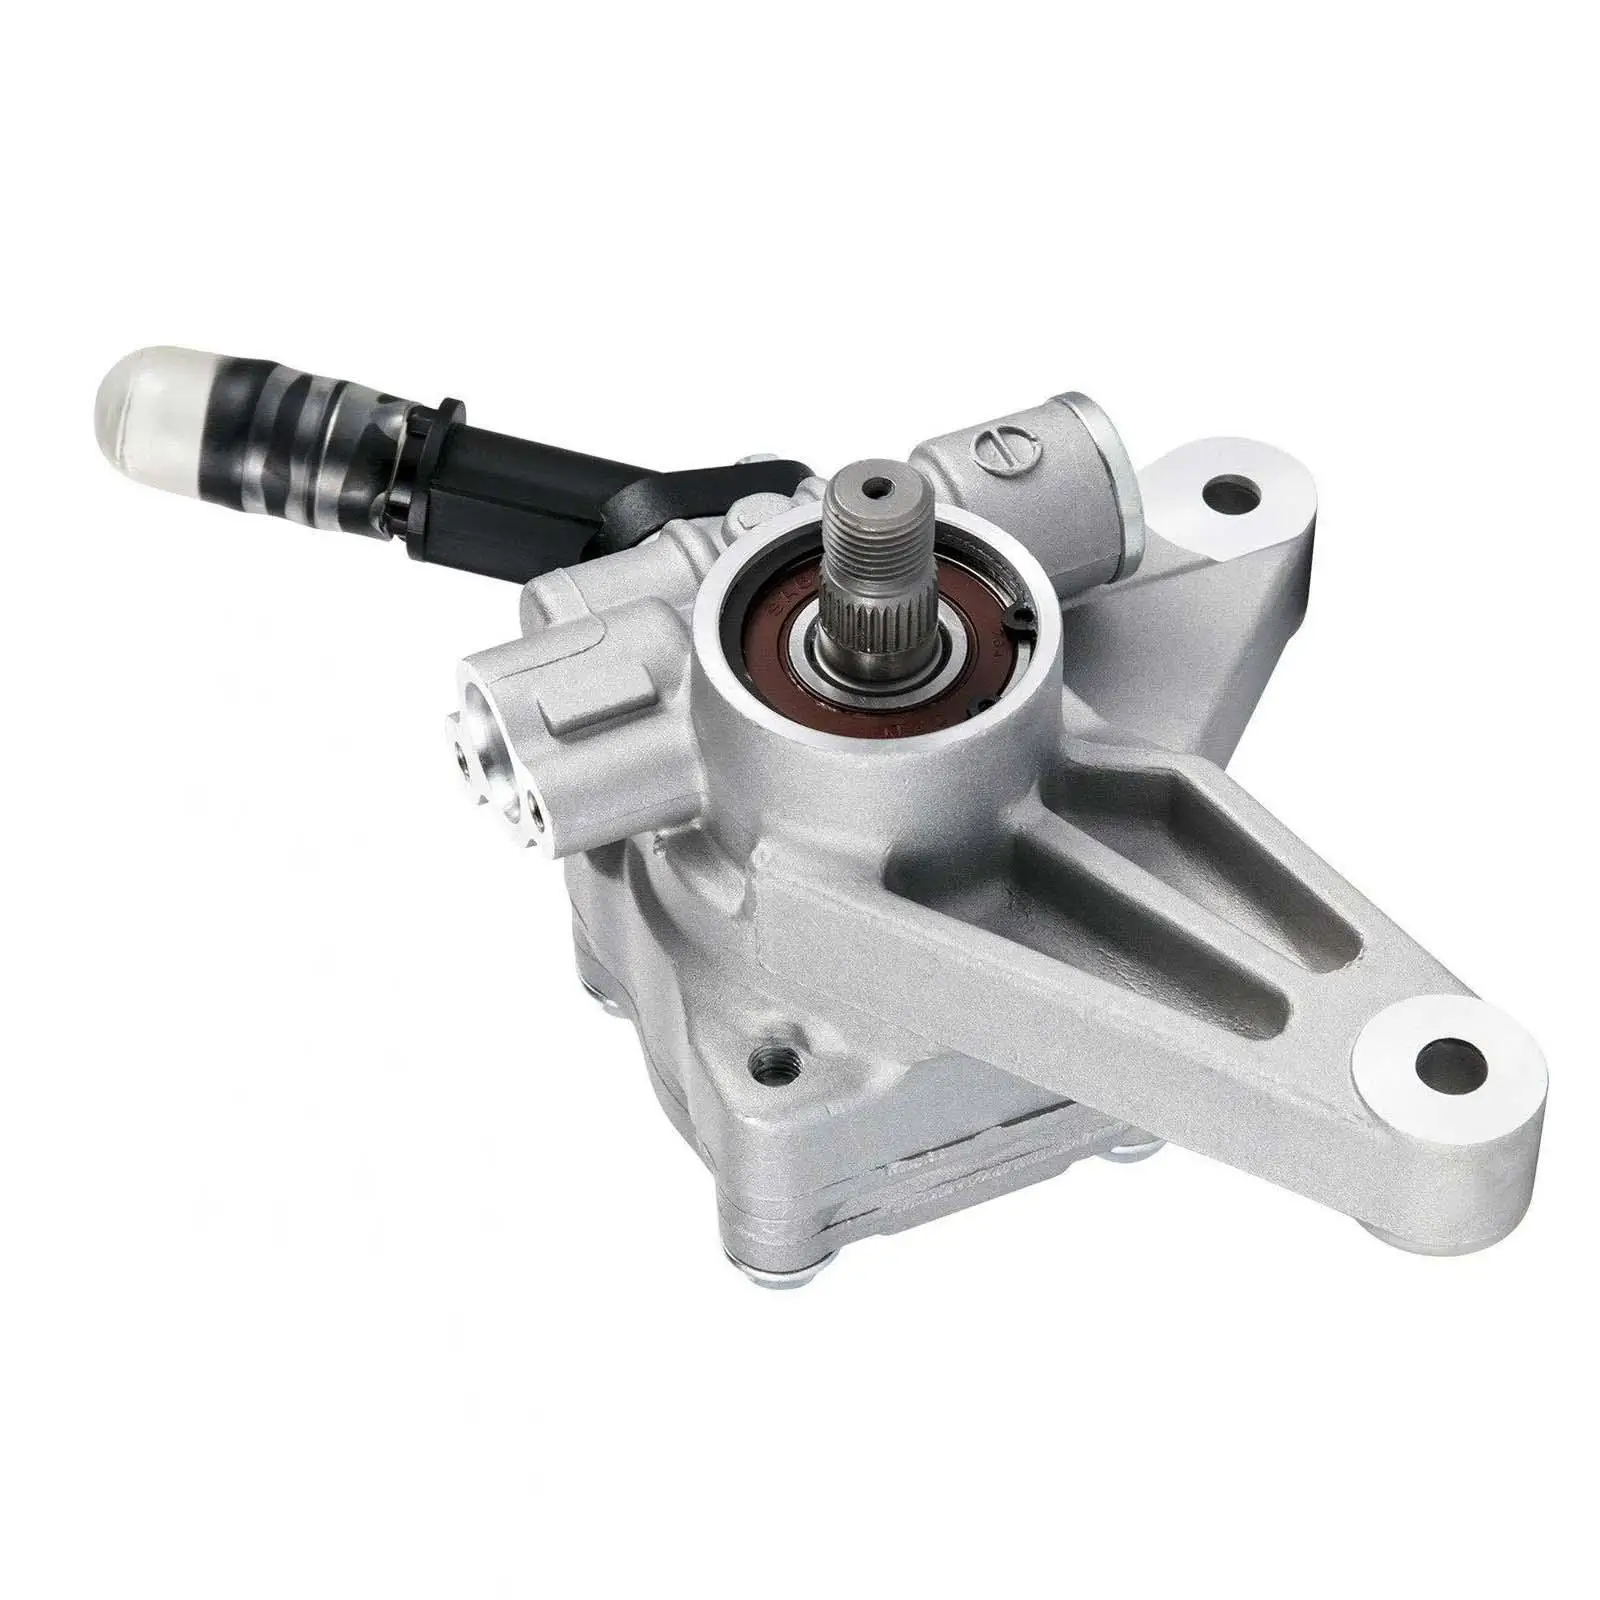 Power Steering Pump Rgl-a03zlzxb00001 ,Car Accessories ,for Odyssey ,Easy Installation ,Repair Part Performance